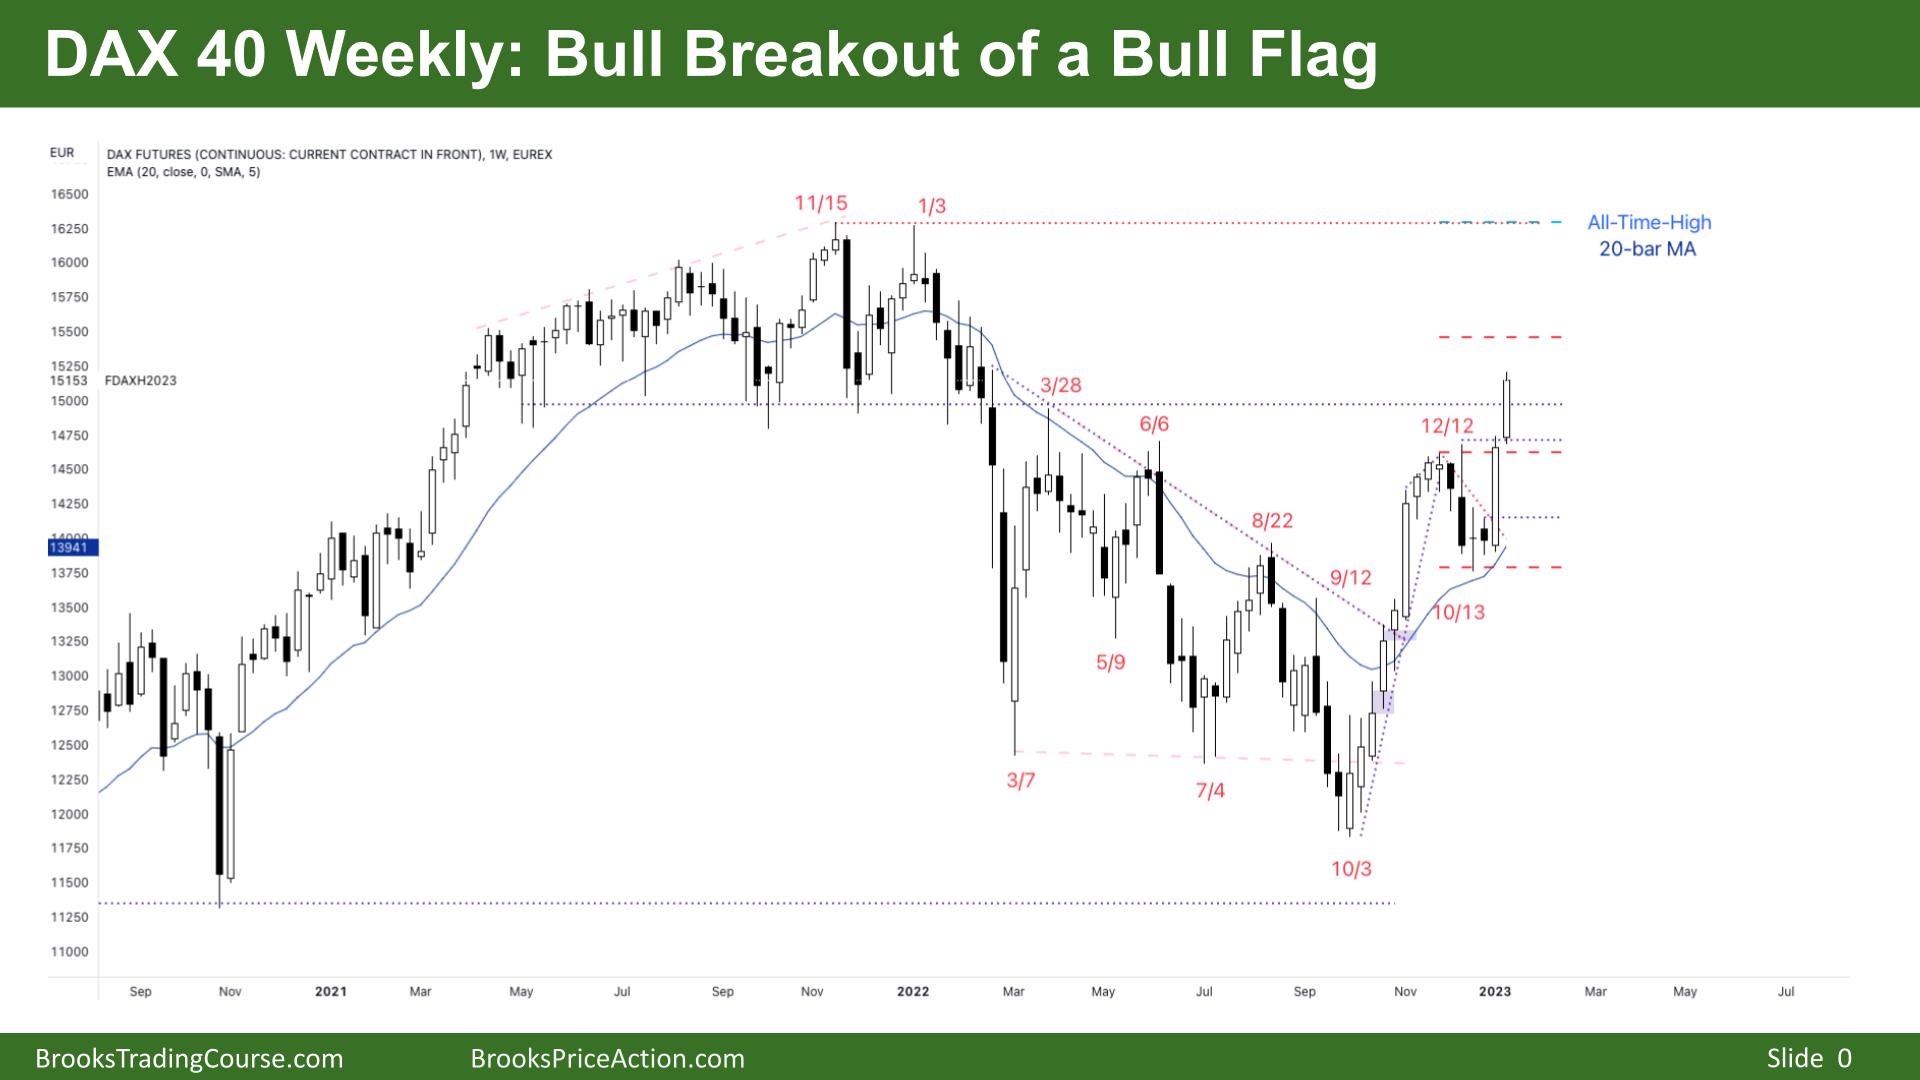 DAX 40 Breakout of Bull Flag on Weekly Chart